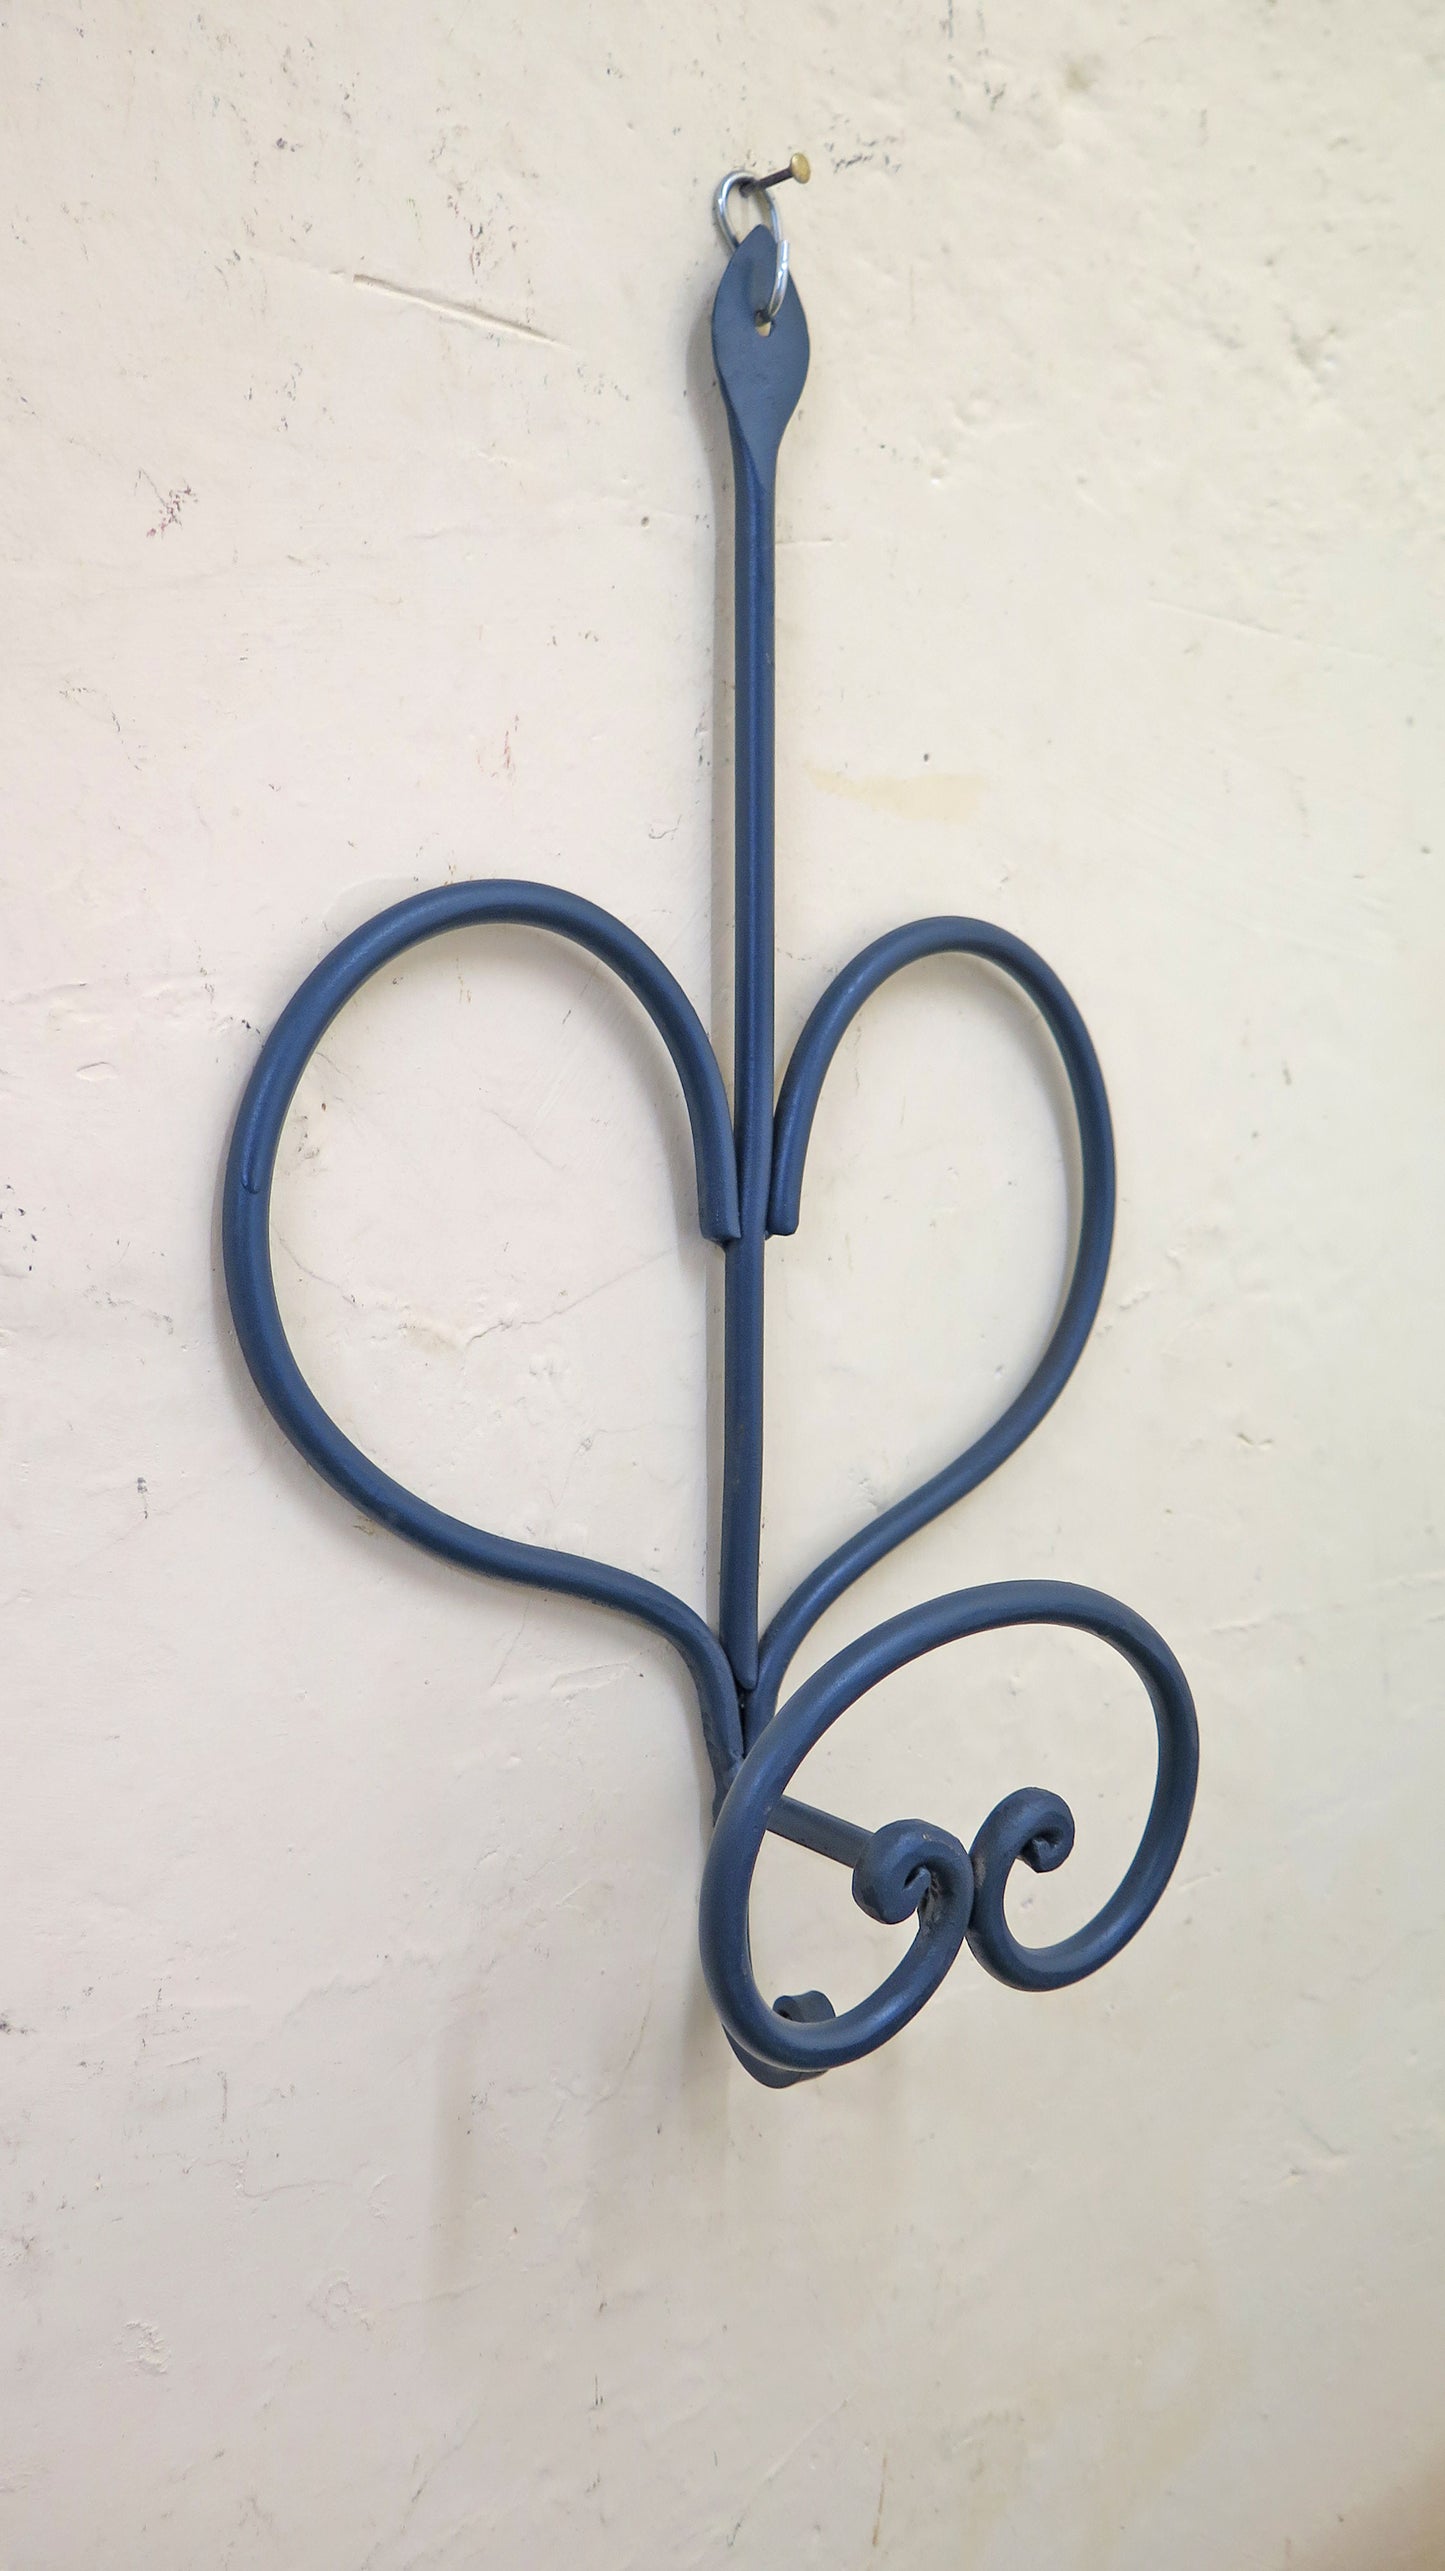 HAND FORGED WALL COAT RACK IN WROUGHT IRON HEART SHAPE HOOK CH34